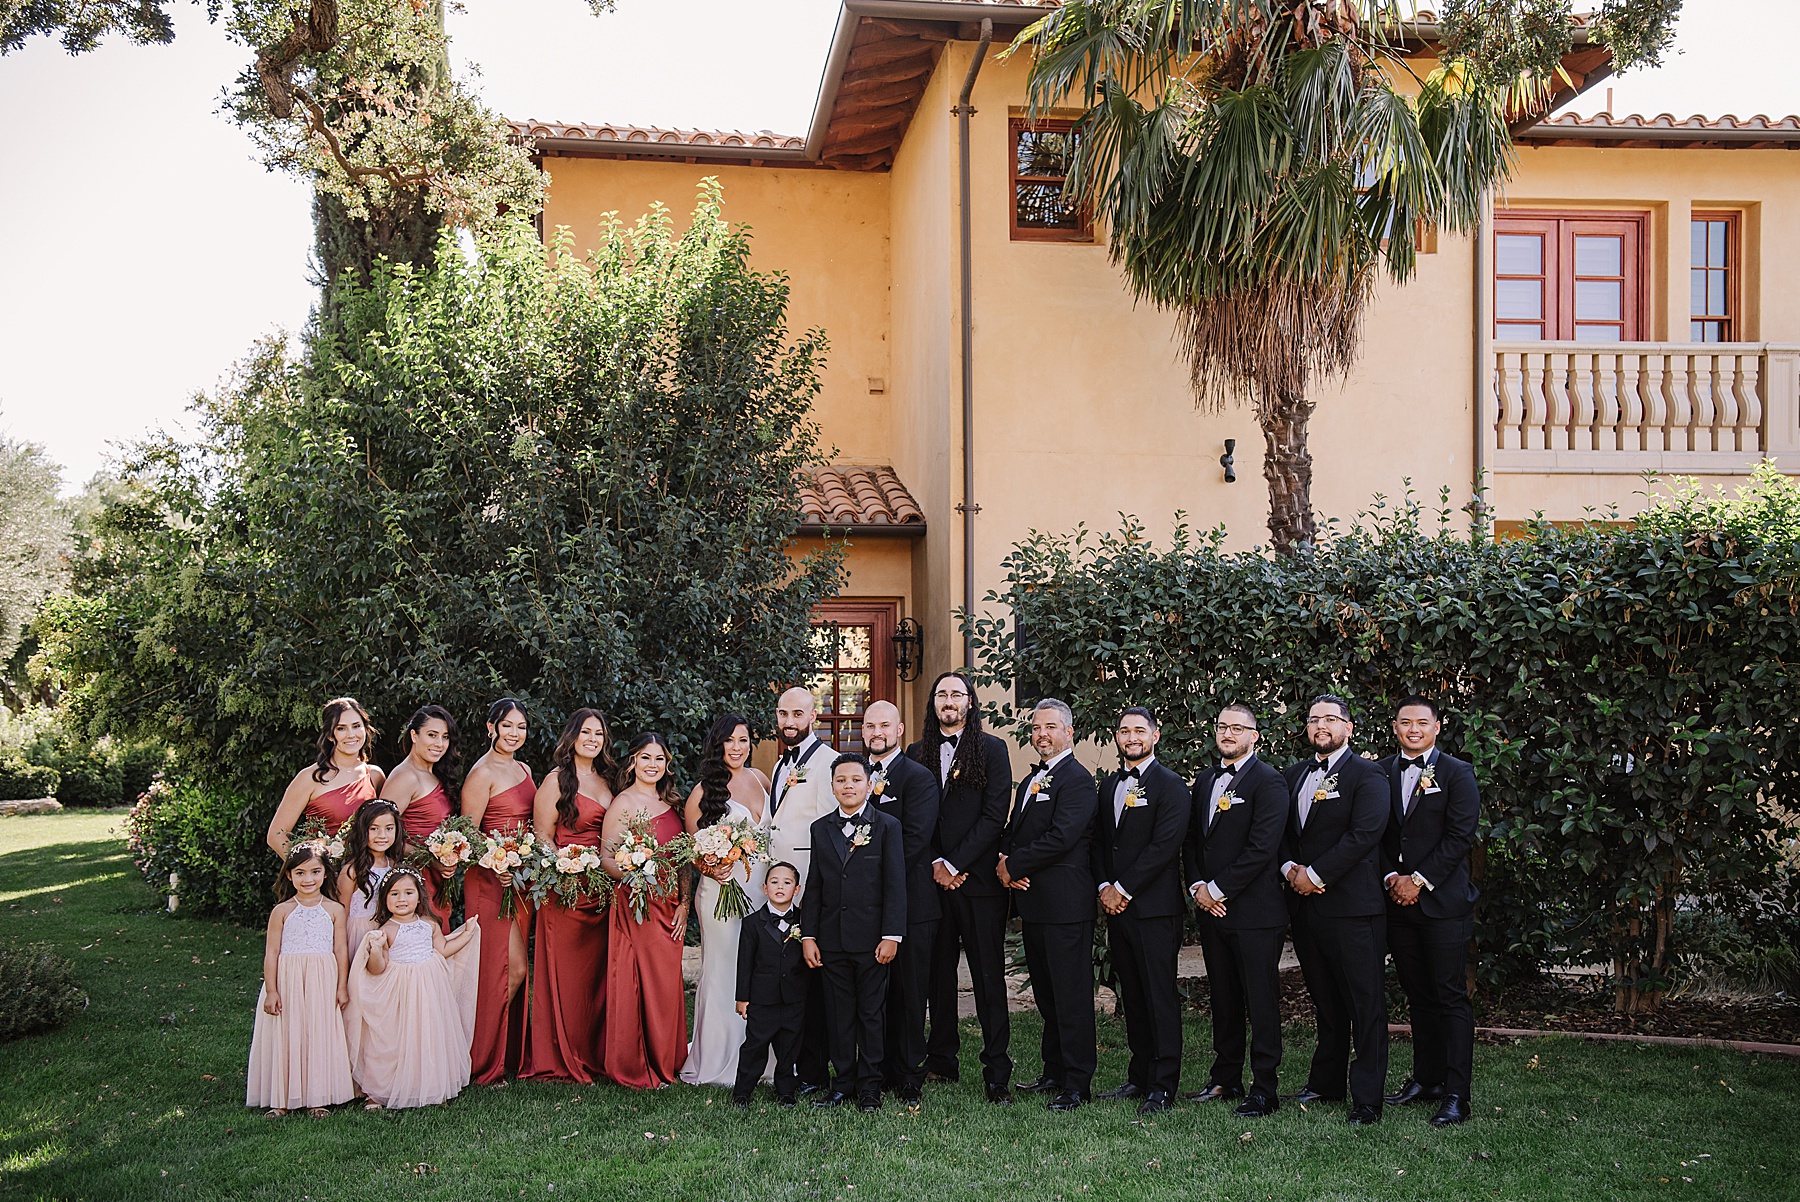 Bride and Groom with their wedding party at the Villa San Juliette, a Italian-Inspired Wedding Venue in San Luis Obispo.